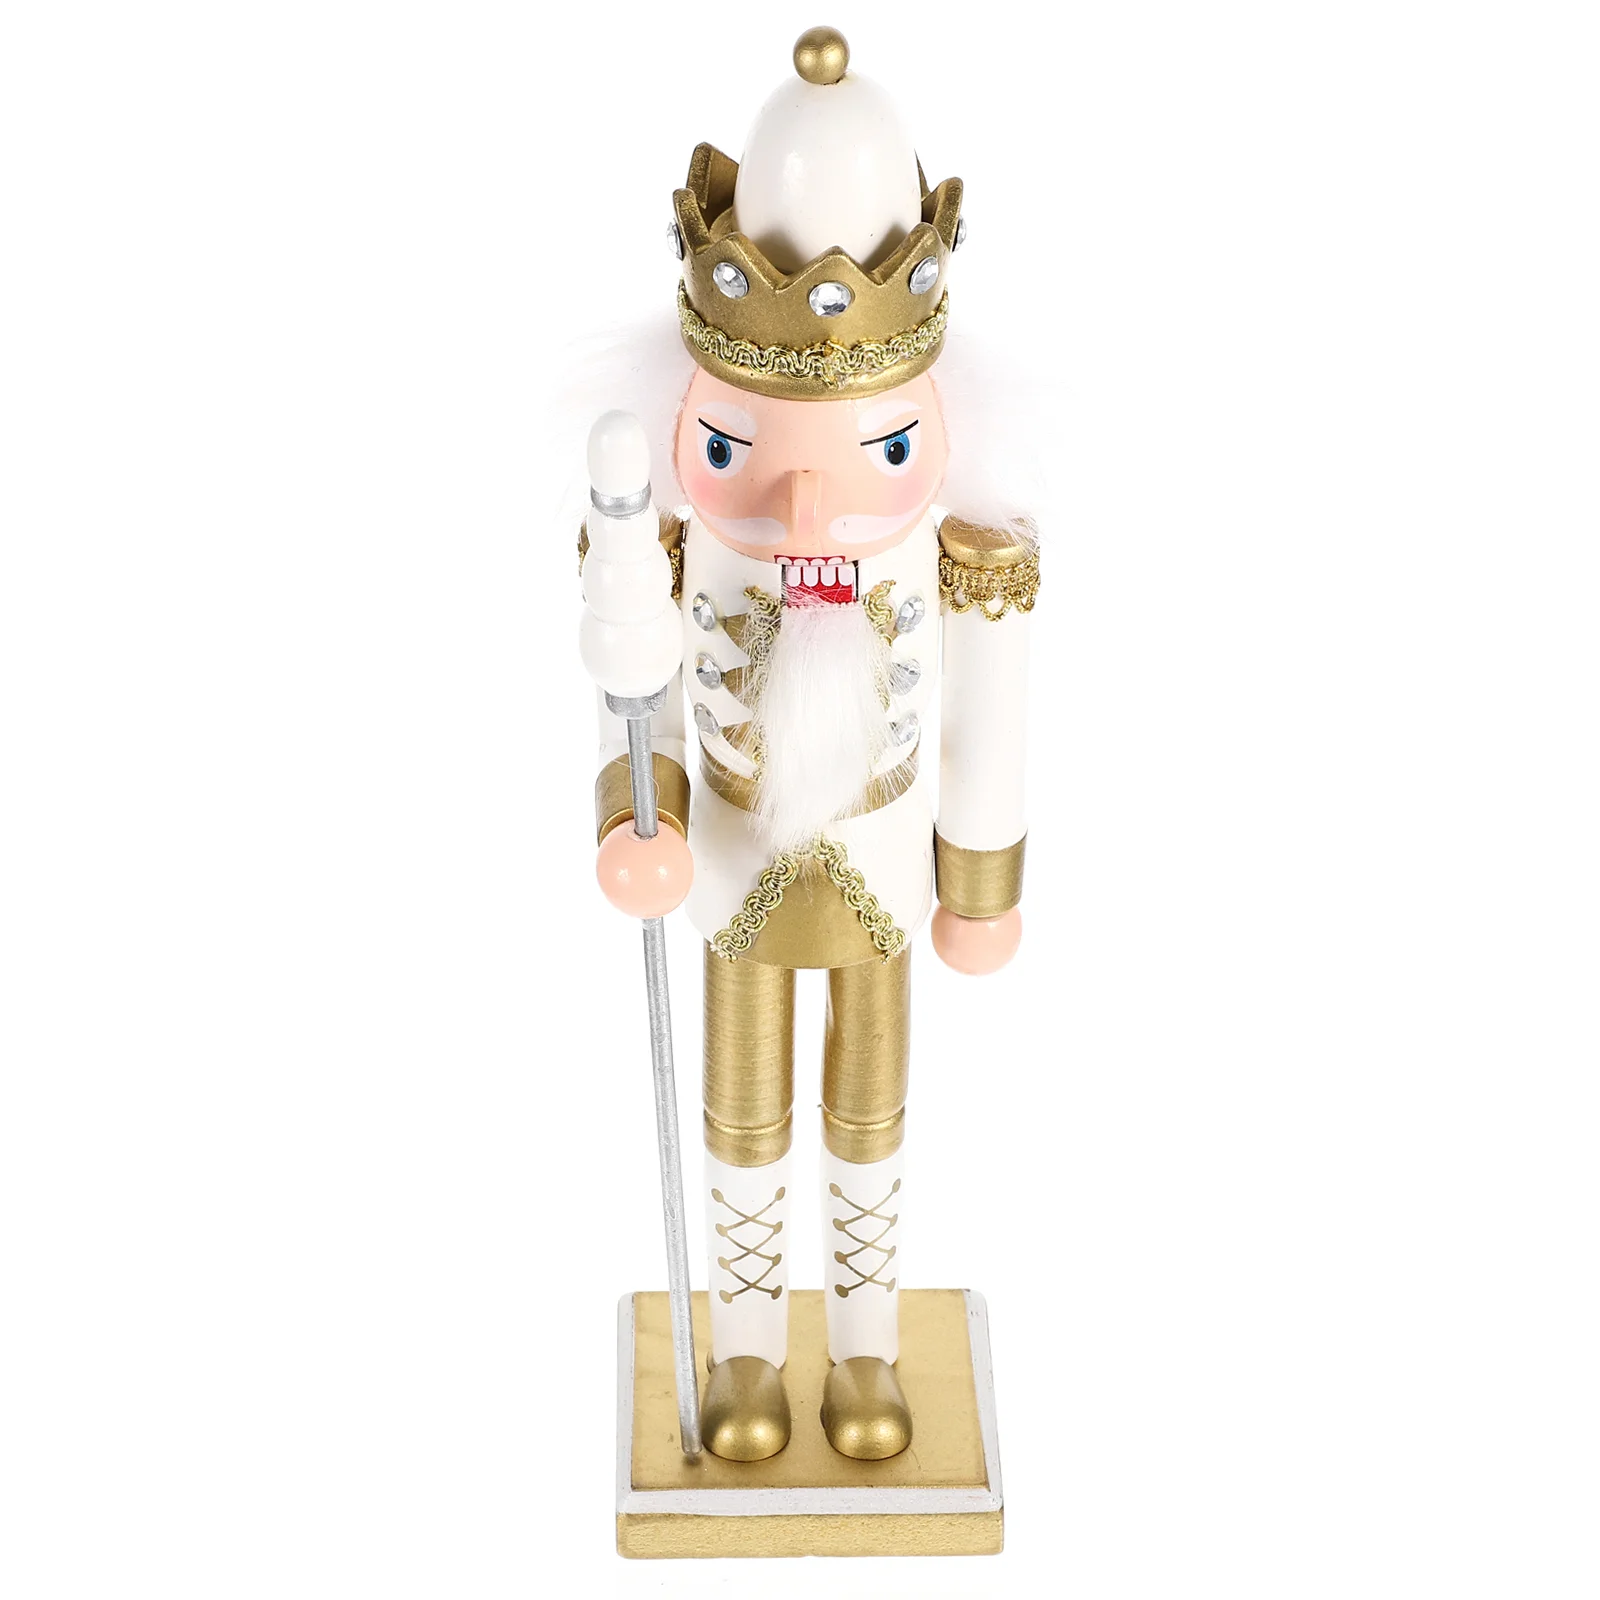 

30cm Christmas Nutcracker Wood Biscuits Festival Lovely Soldier Nutcrackers Craft Dining Table Xmas Party Favor Desktop Giant